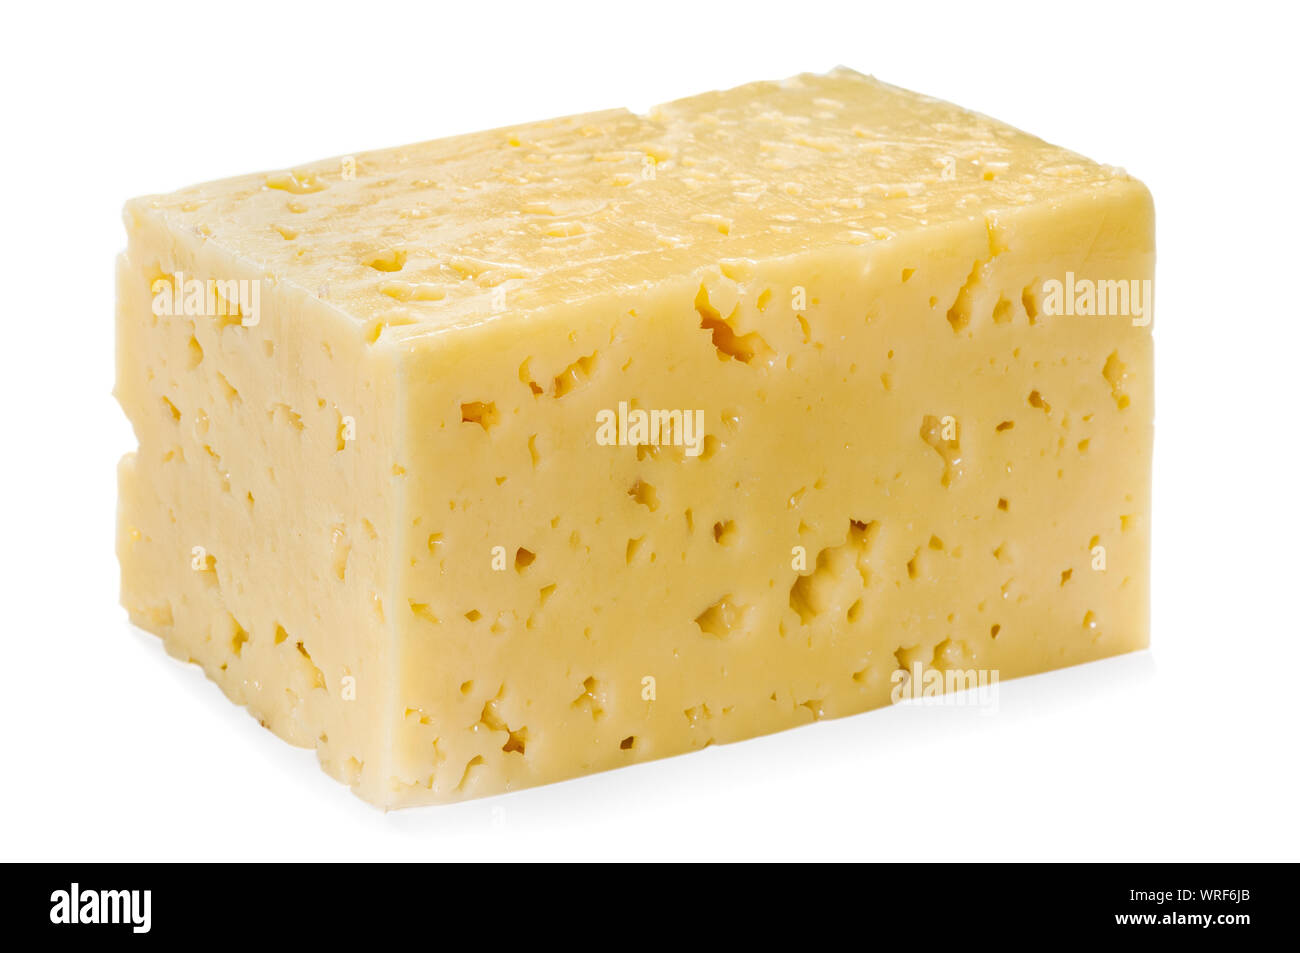 https://c8.alamy.com/comp/WRF6JB/cheese-block-isolated-on-white-background-with-clipping-path-WRF6JB.jpg